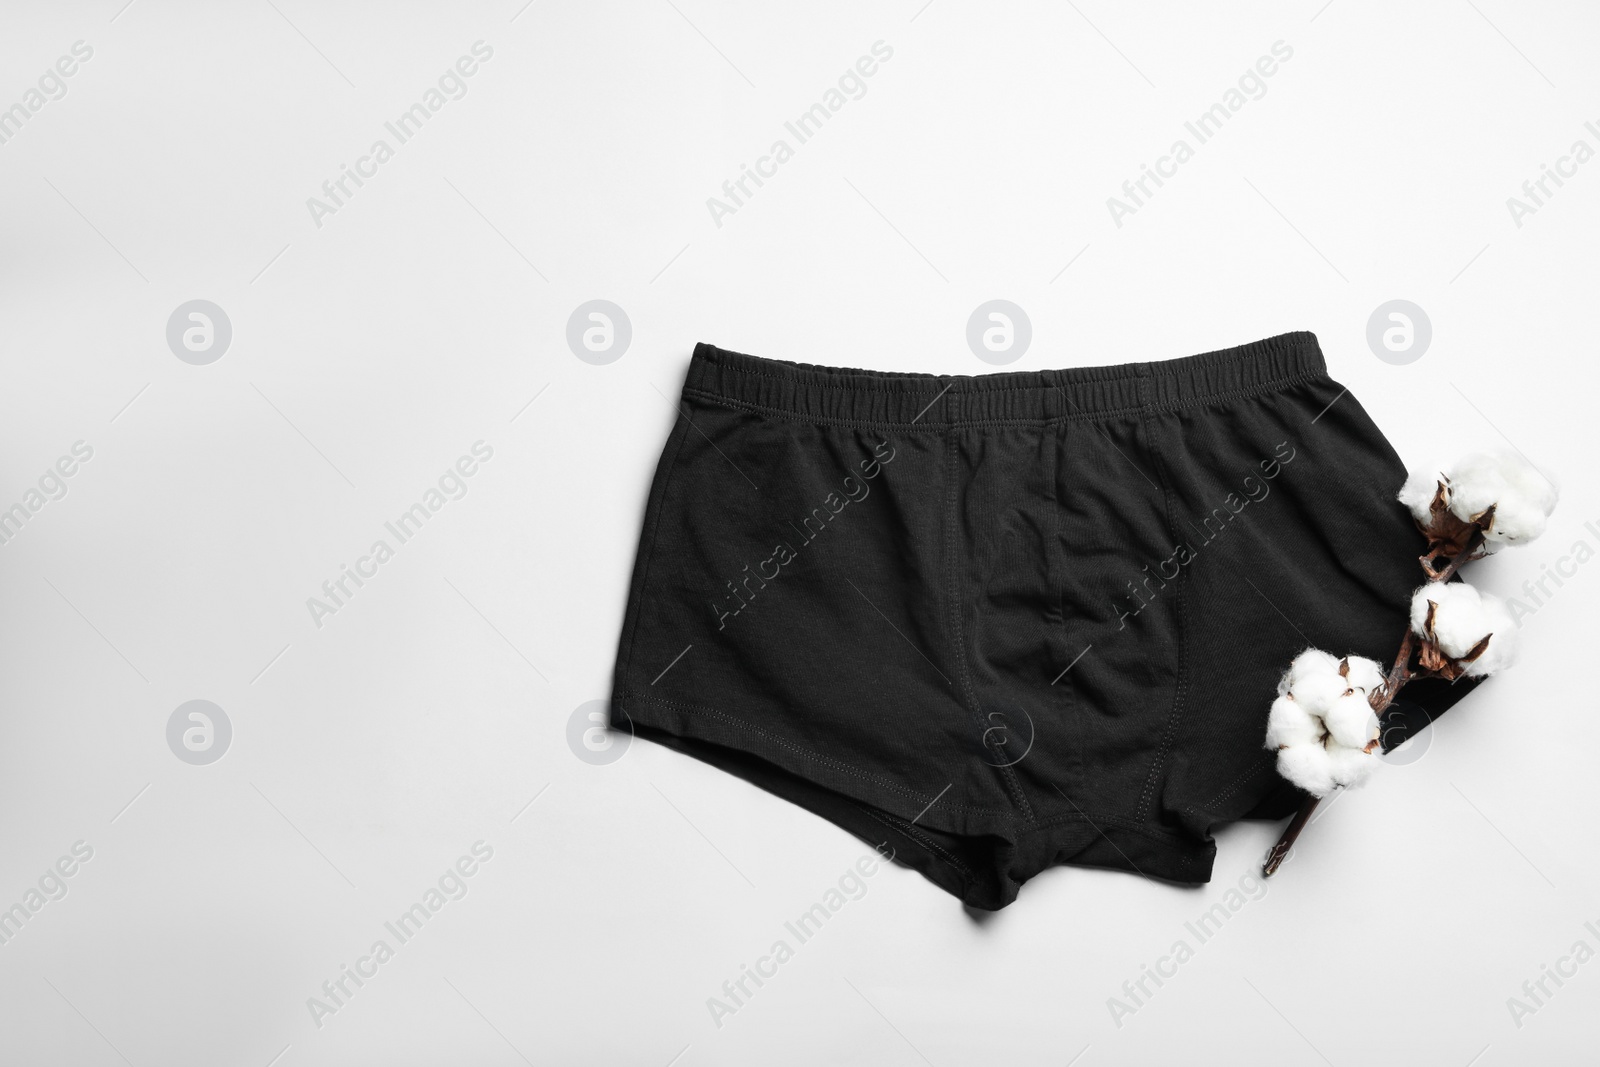 Photo of Comfortable men's underwear and cotton flowers on light background, top view